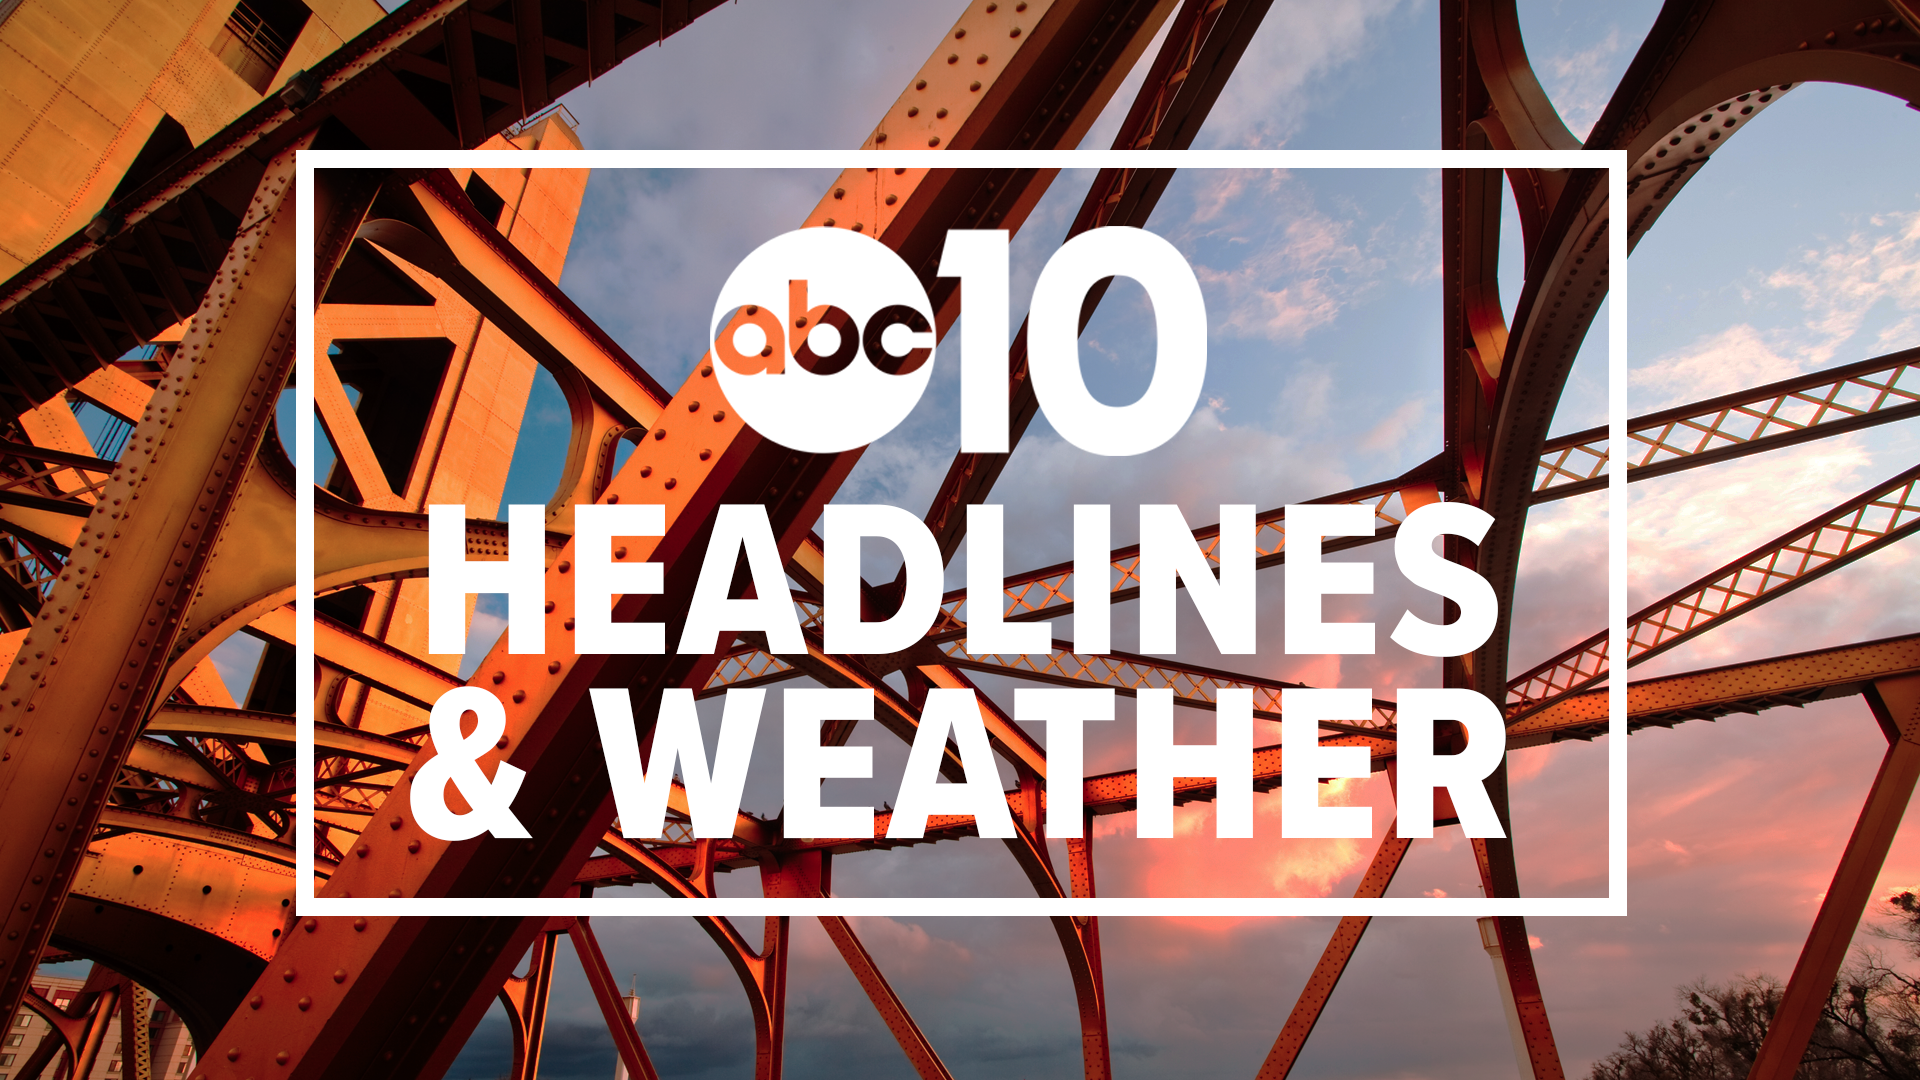 Morning Headlines: January 8, 2020 | Catch in-depth reporting on #LateNewsTonight at 11 p.m. | The latest Sacramento news is always at www.abc10.com